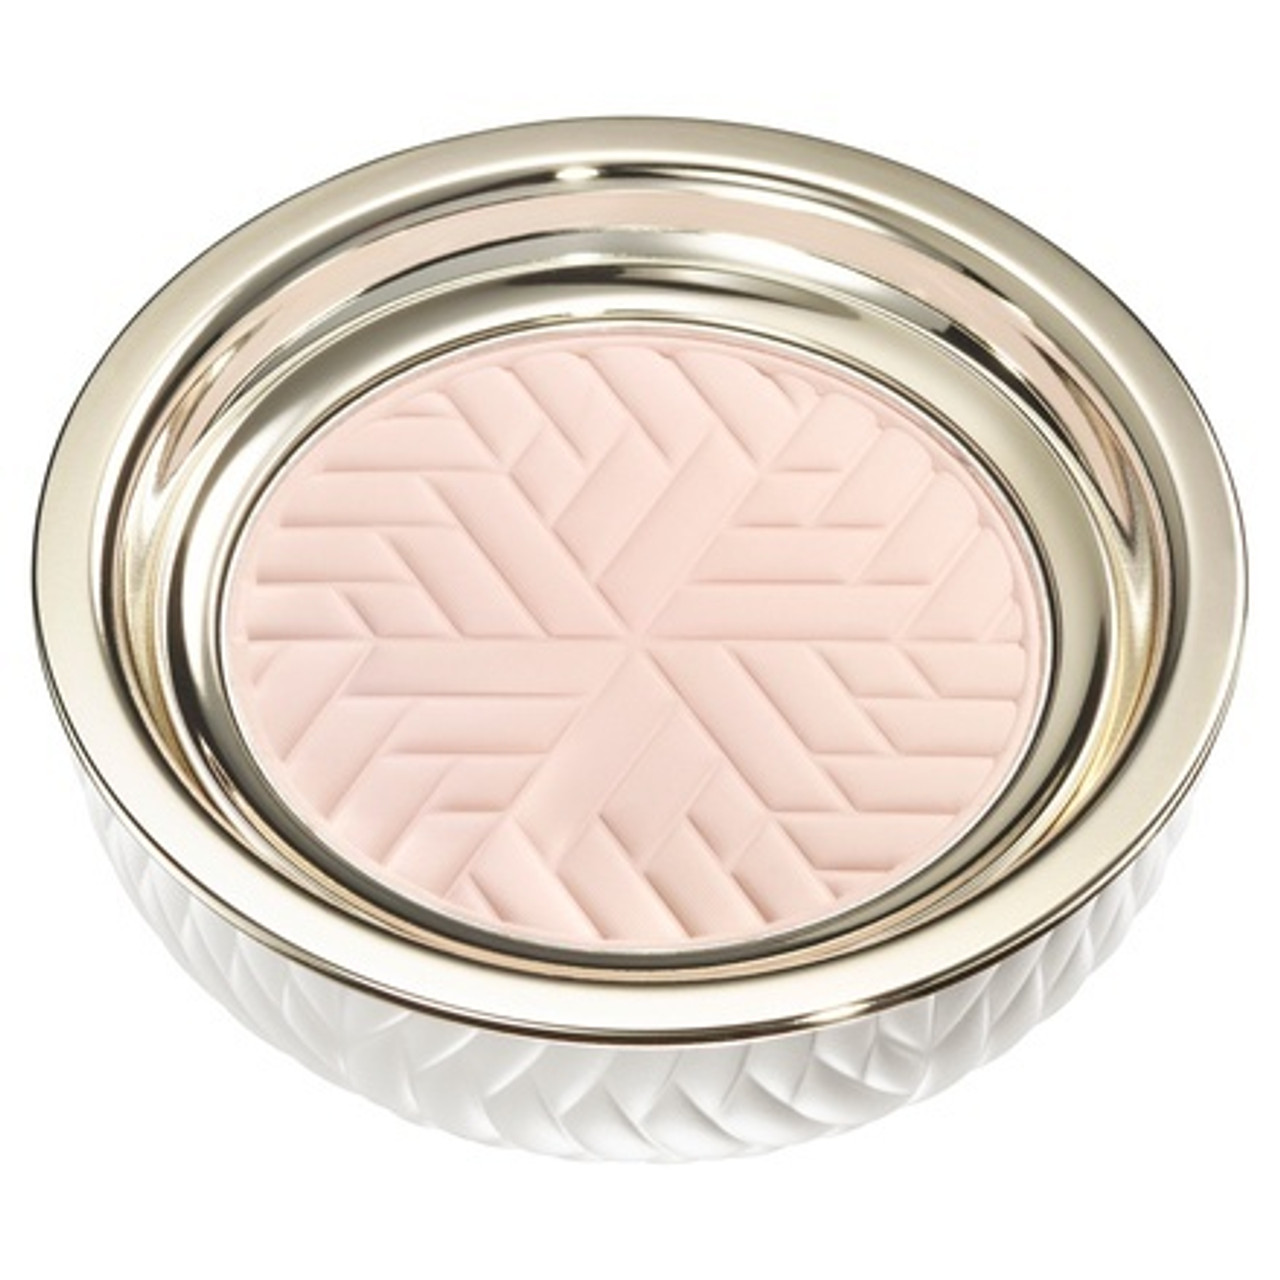 COSME DECORTE Marcel Wanders Collection Cosme Deocrte Face Powder ...